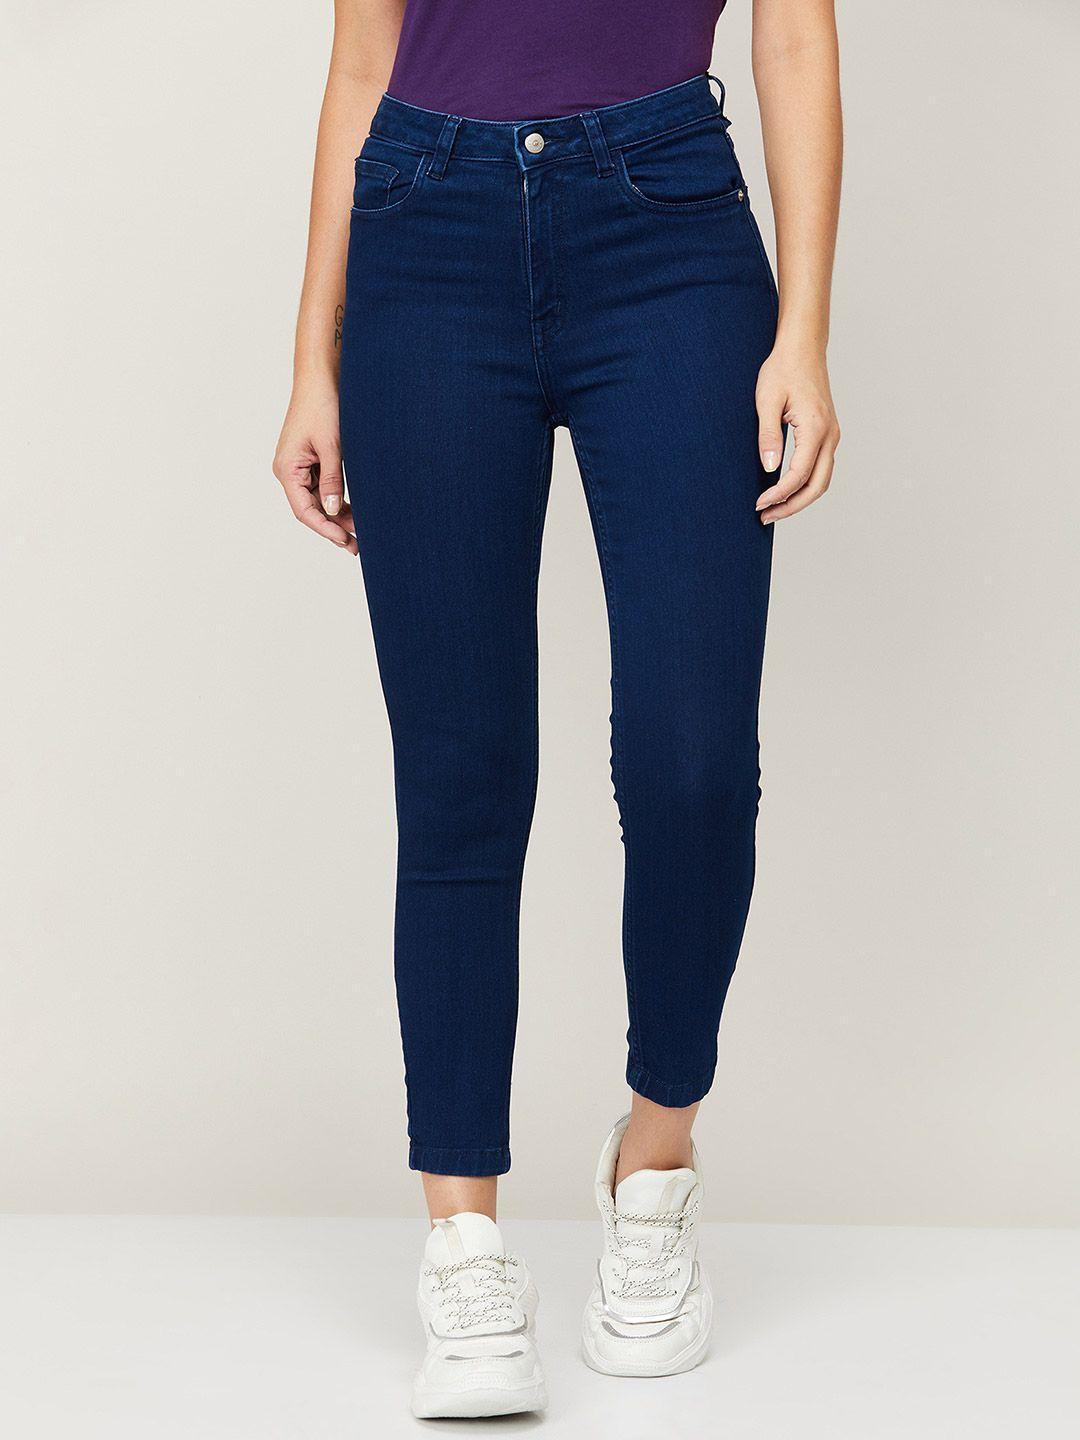 fame-forever-by-lifestyle-women-blue-skinny-fit-jeans